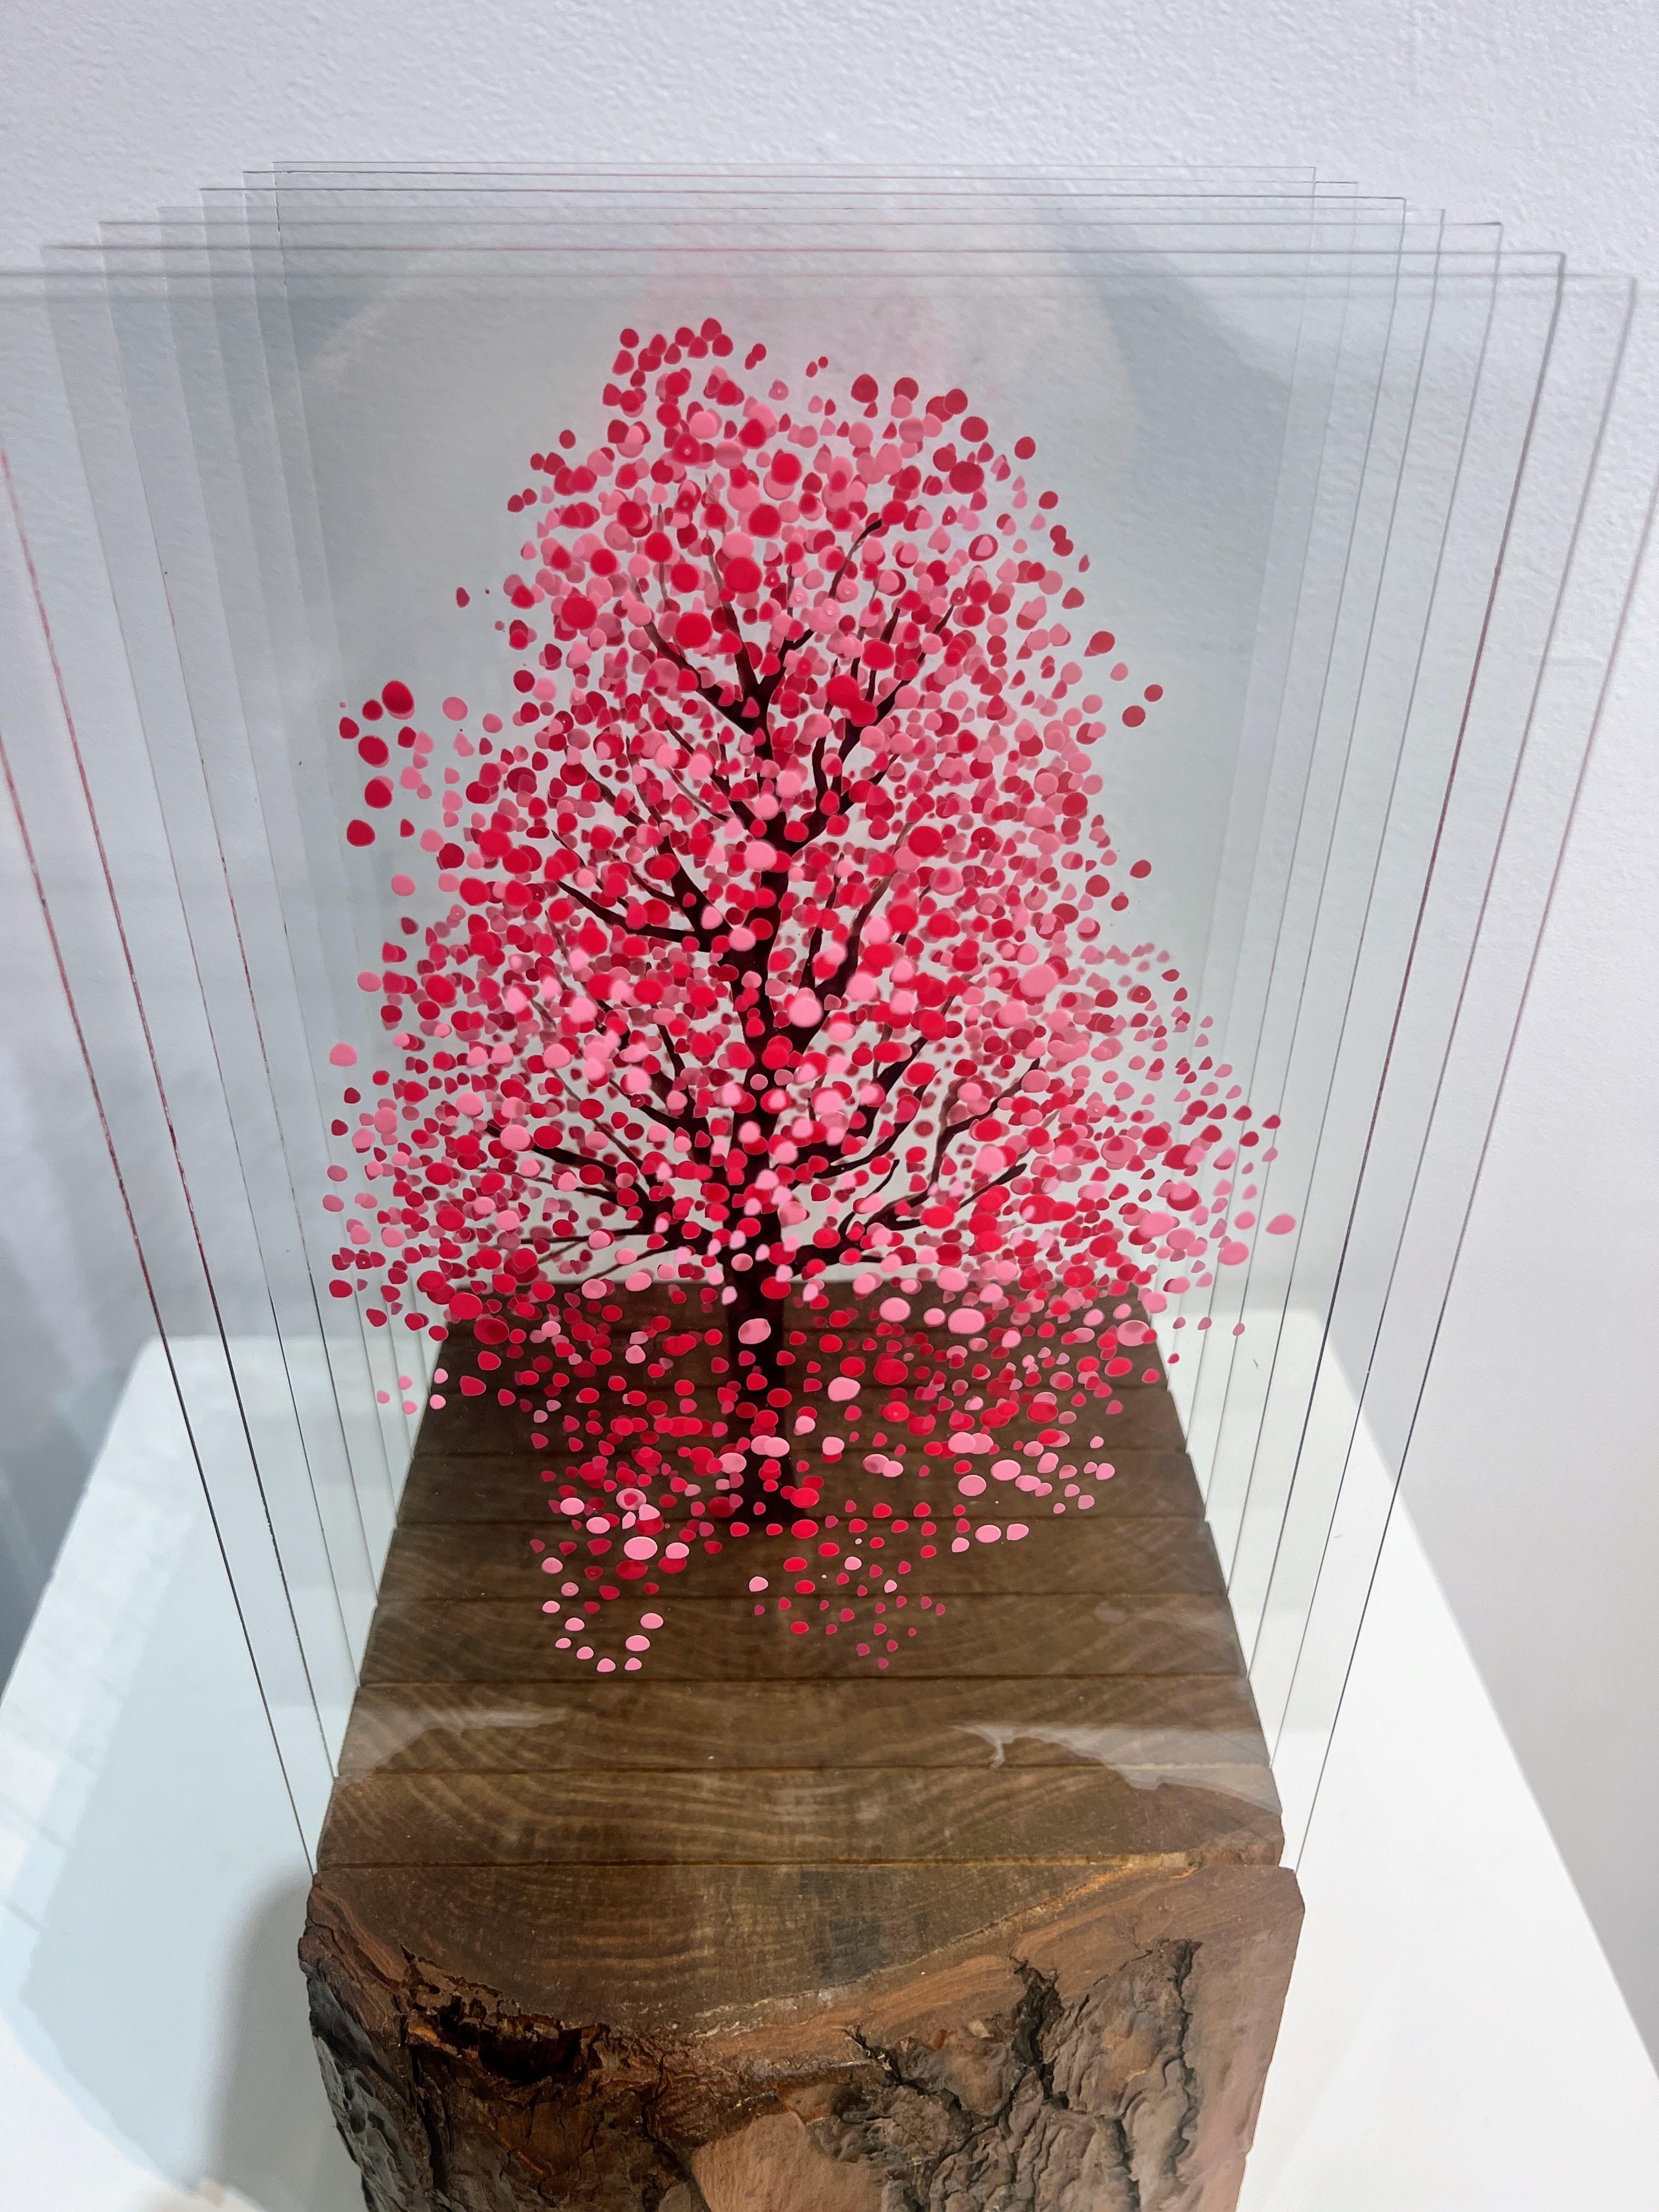 A sculpture made with glass layers and painted with nail polish and acrylic, set on an acrylic pedestal. 
The glass leaves are separated by slits on the pedestal and give the sculpture an extraordinary three-dimensional volume.

With the distinctive